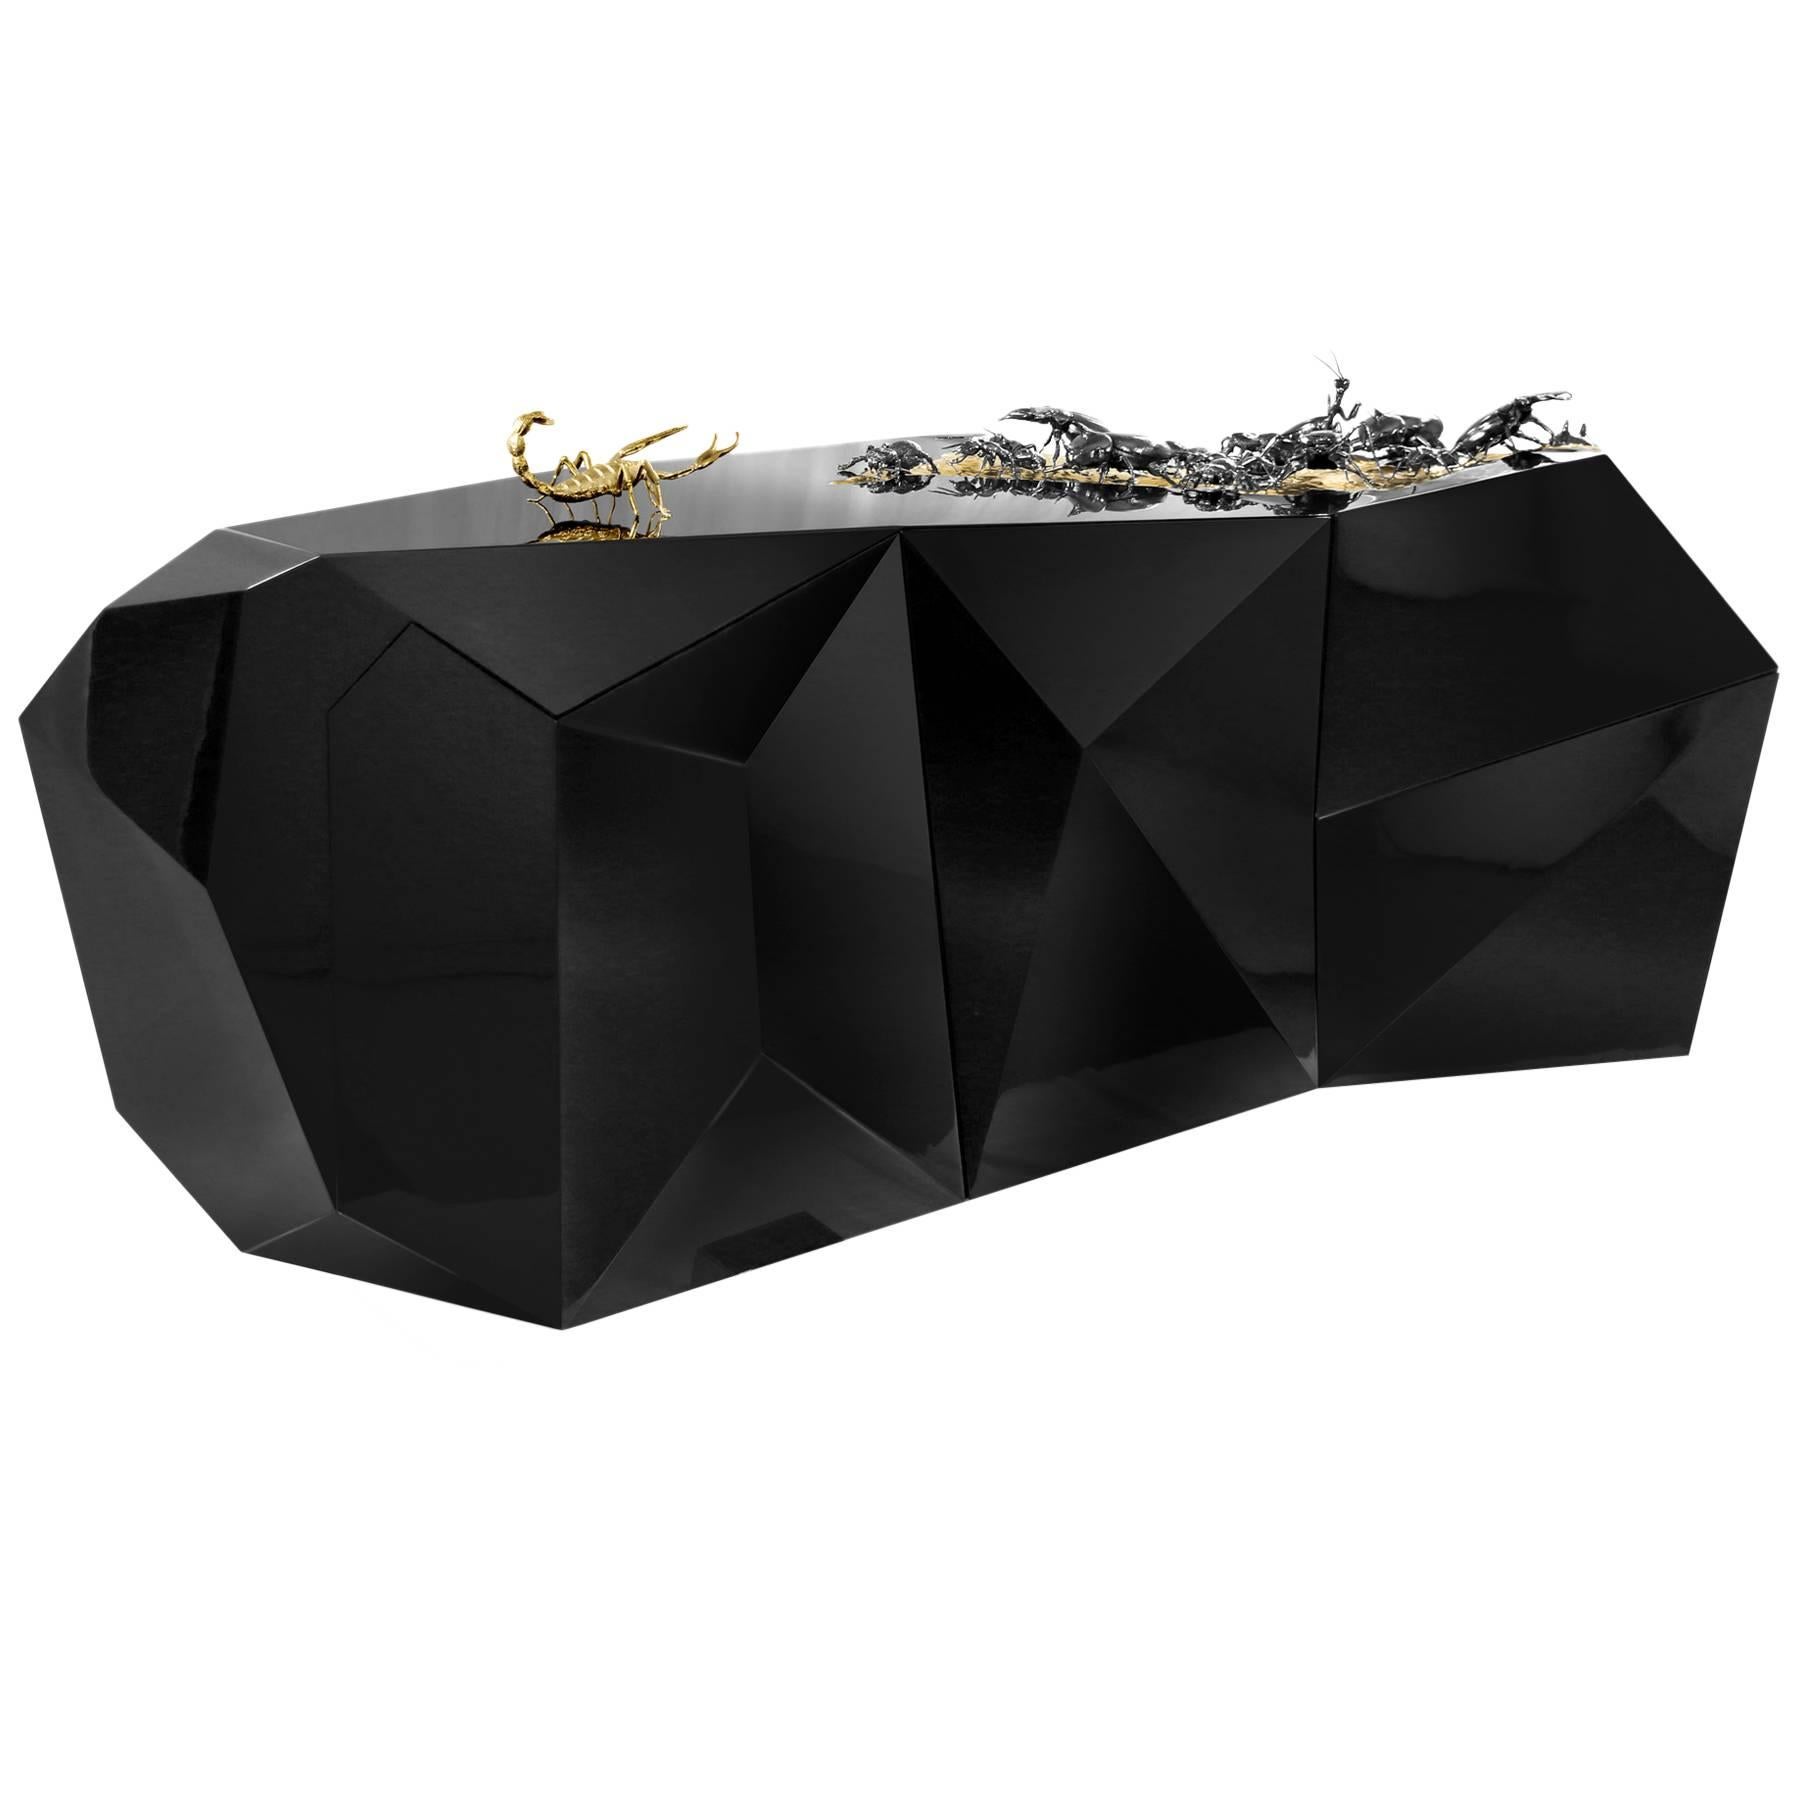 Scorpio Sideboard in Wood Carving Lacquered in Black with Golded Details